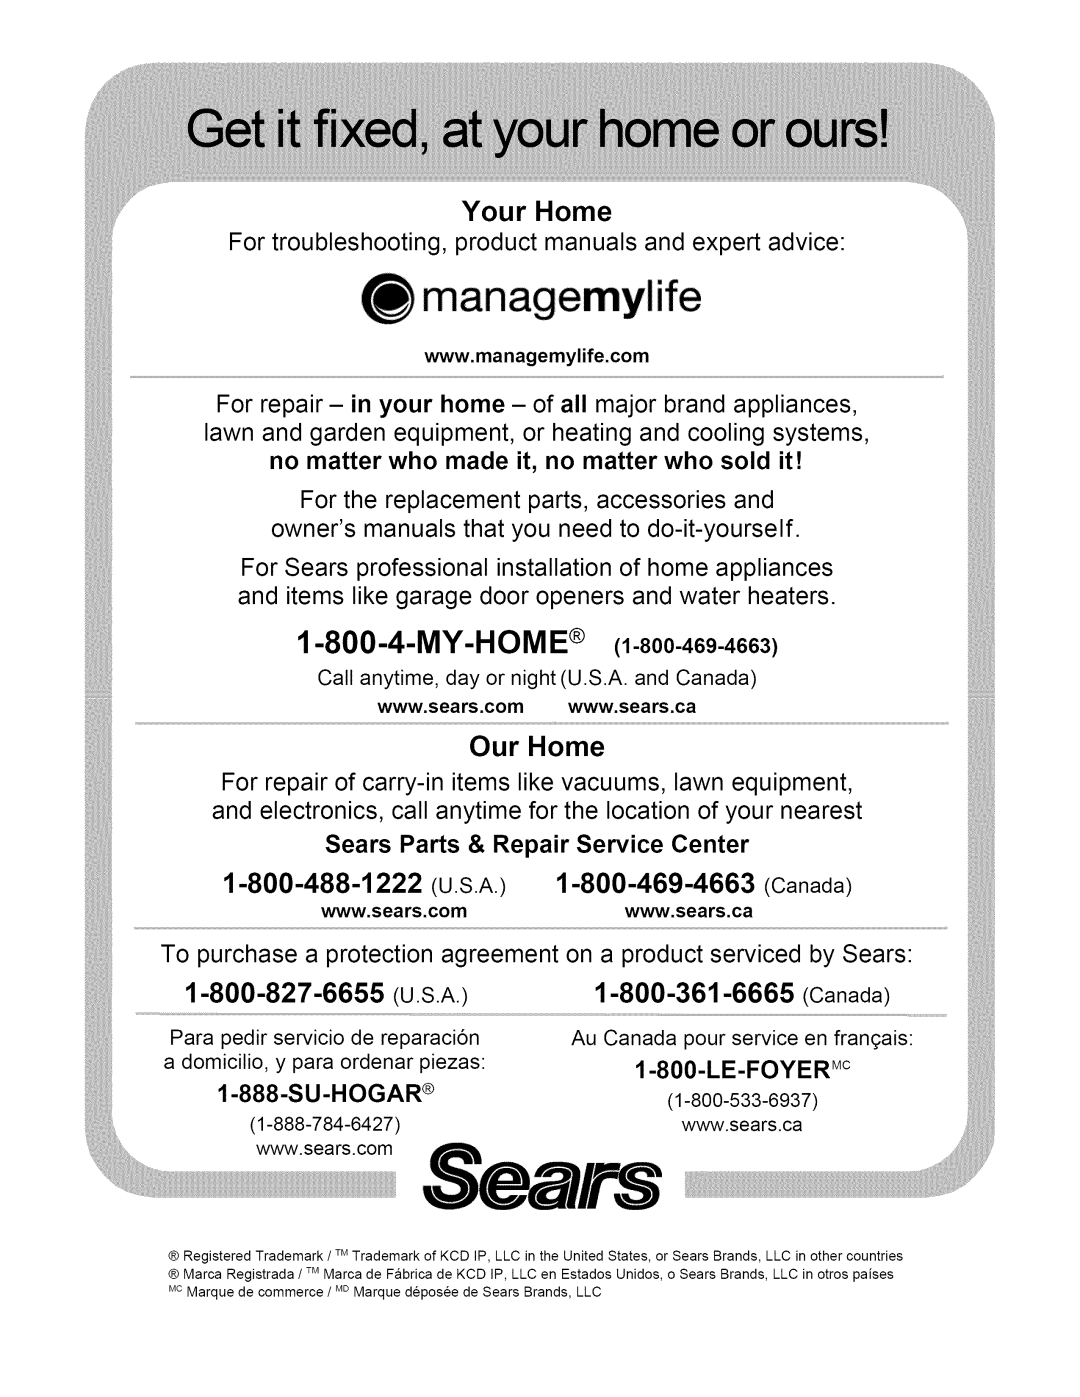 Kenmore 153.33264 managemylife, Sears Parts & Repair Service Center, My-Home, Your Home, Our Home, 1-800-827-6655 U.S.A 